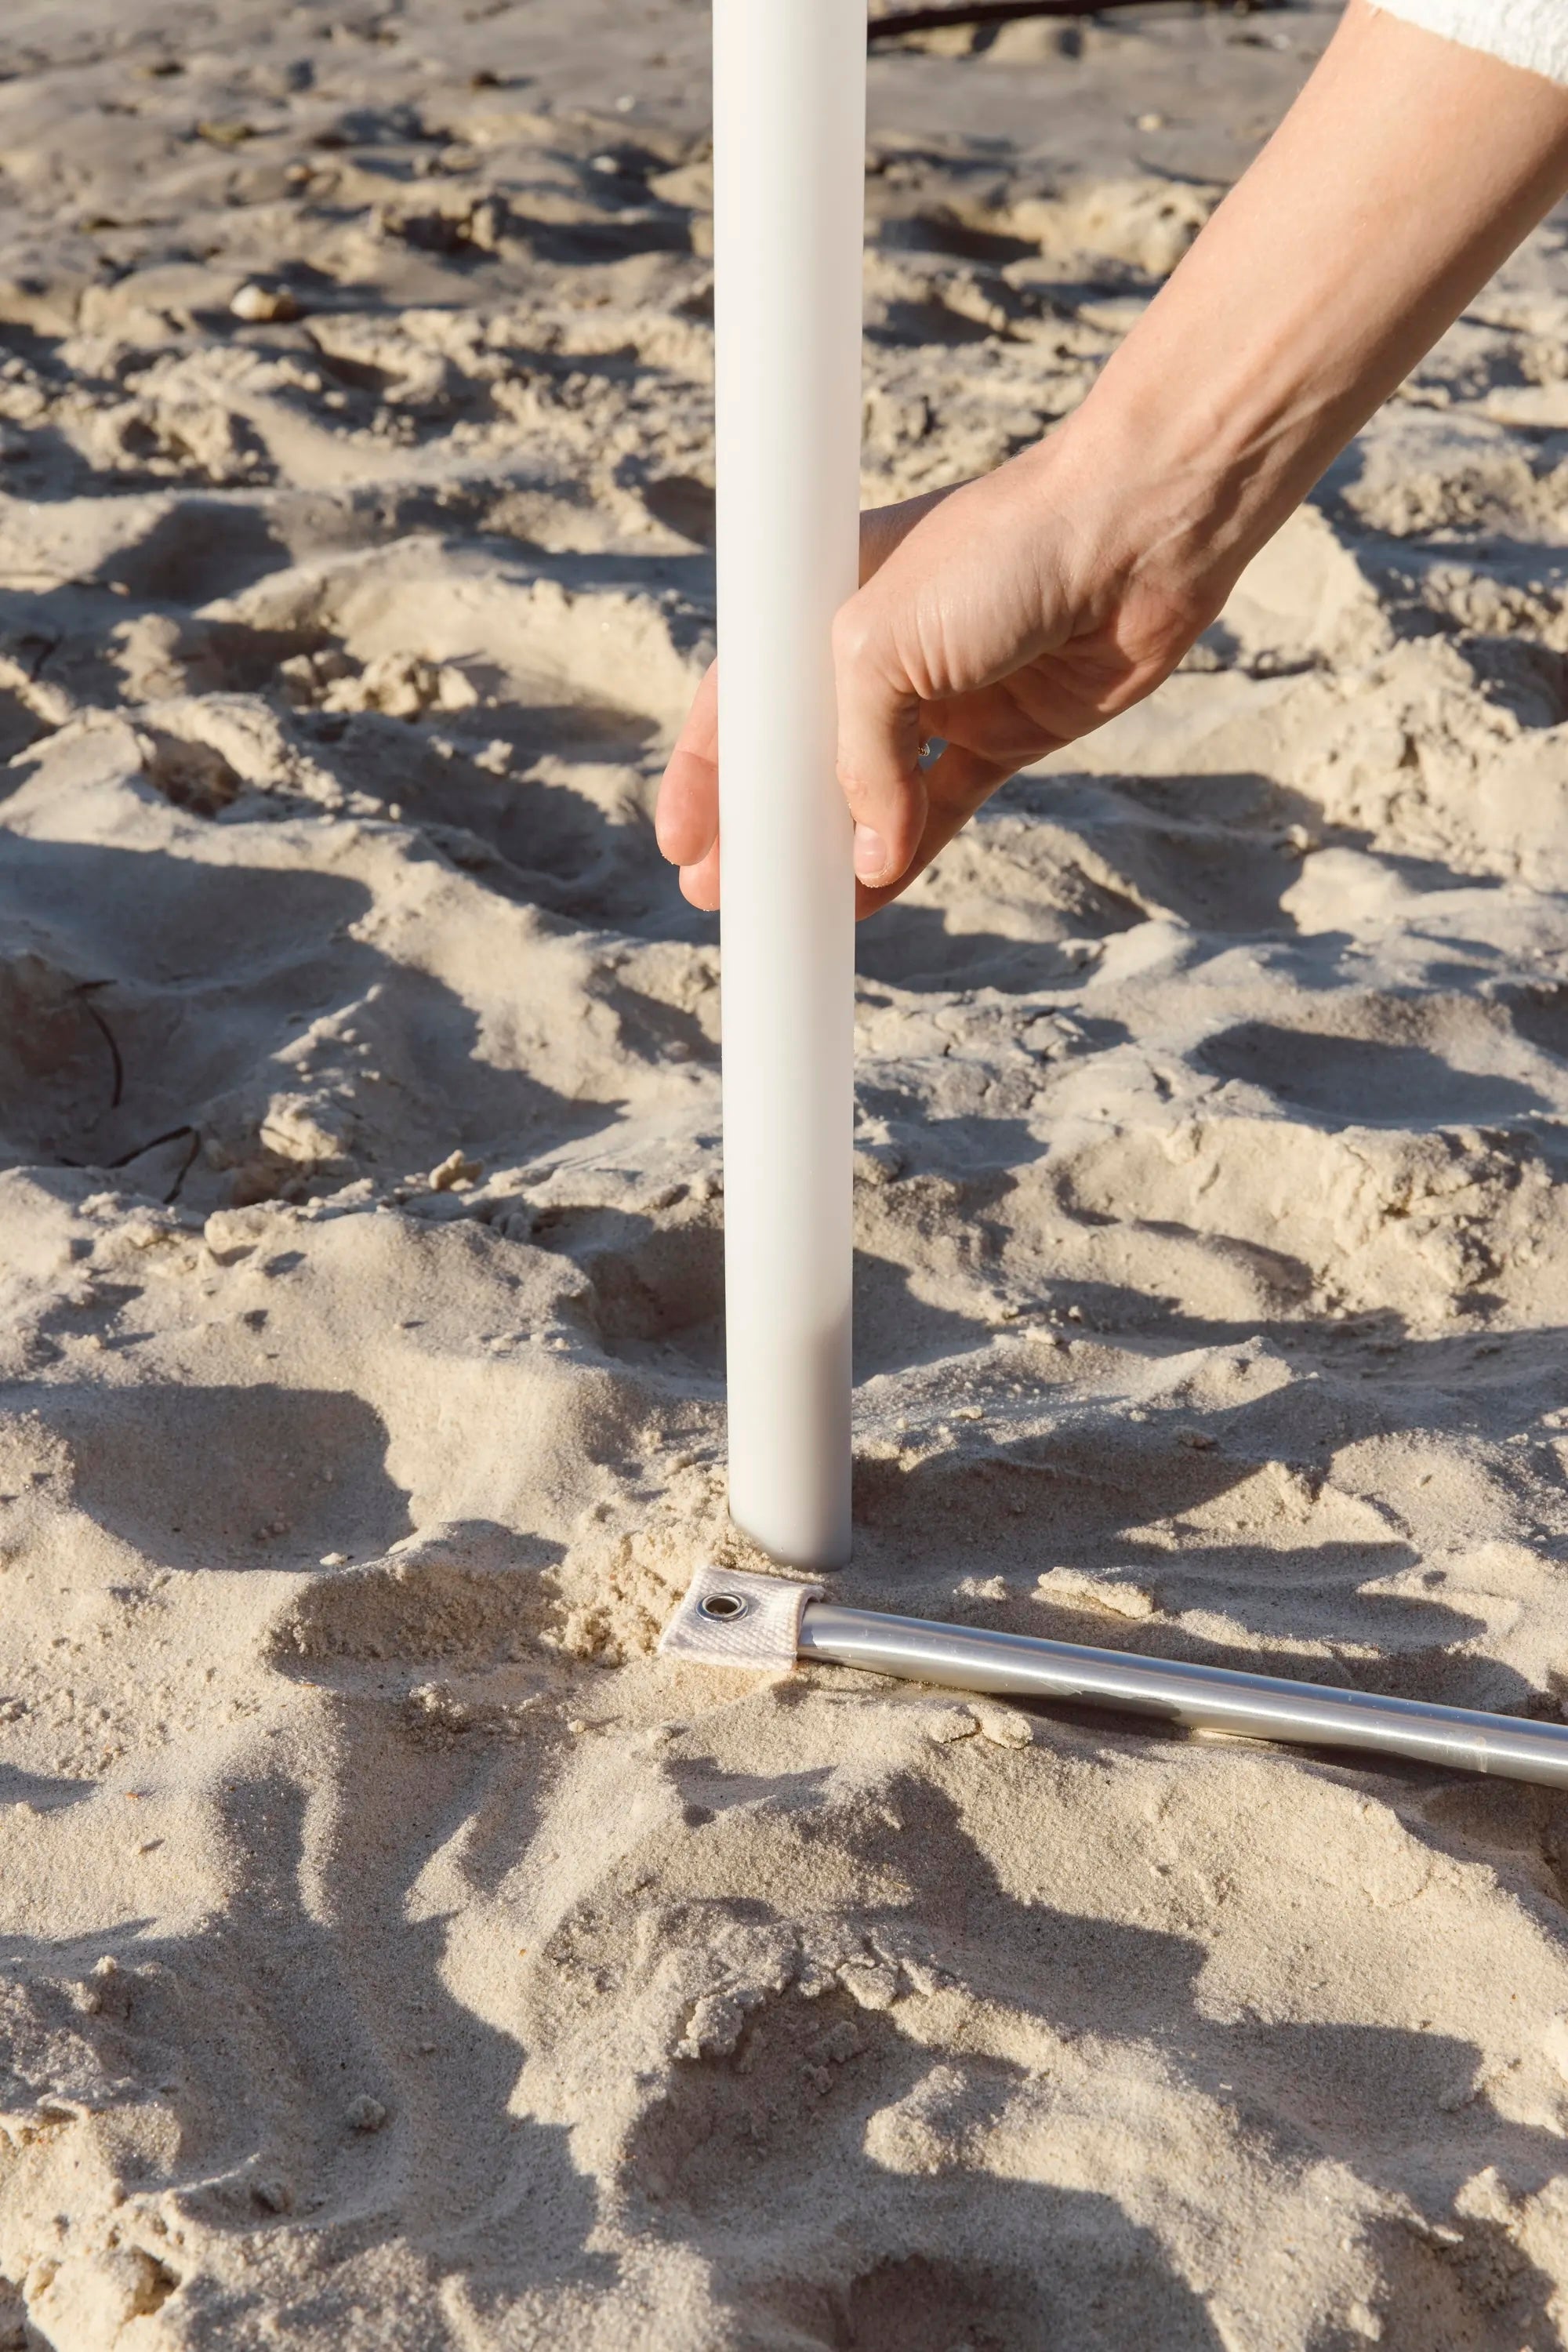 insert guide pipes into sand